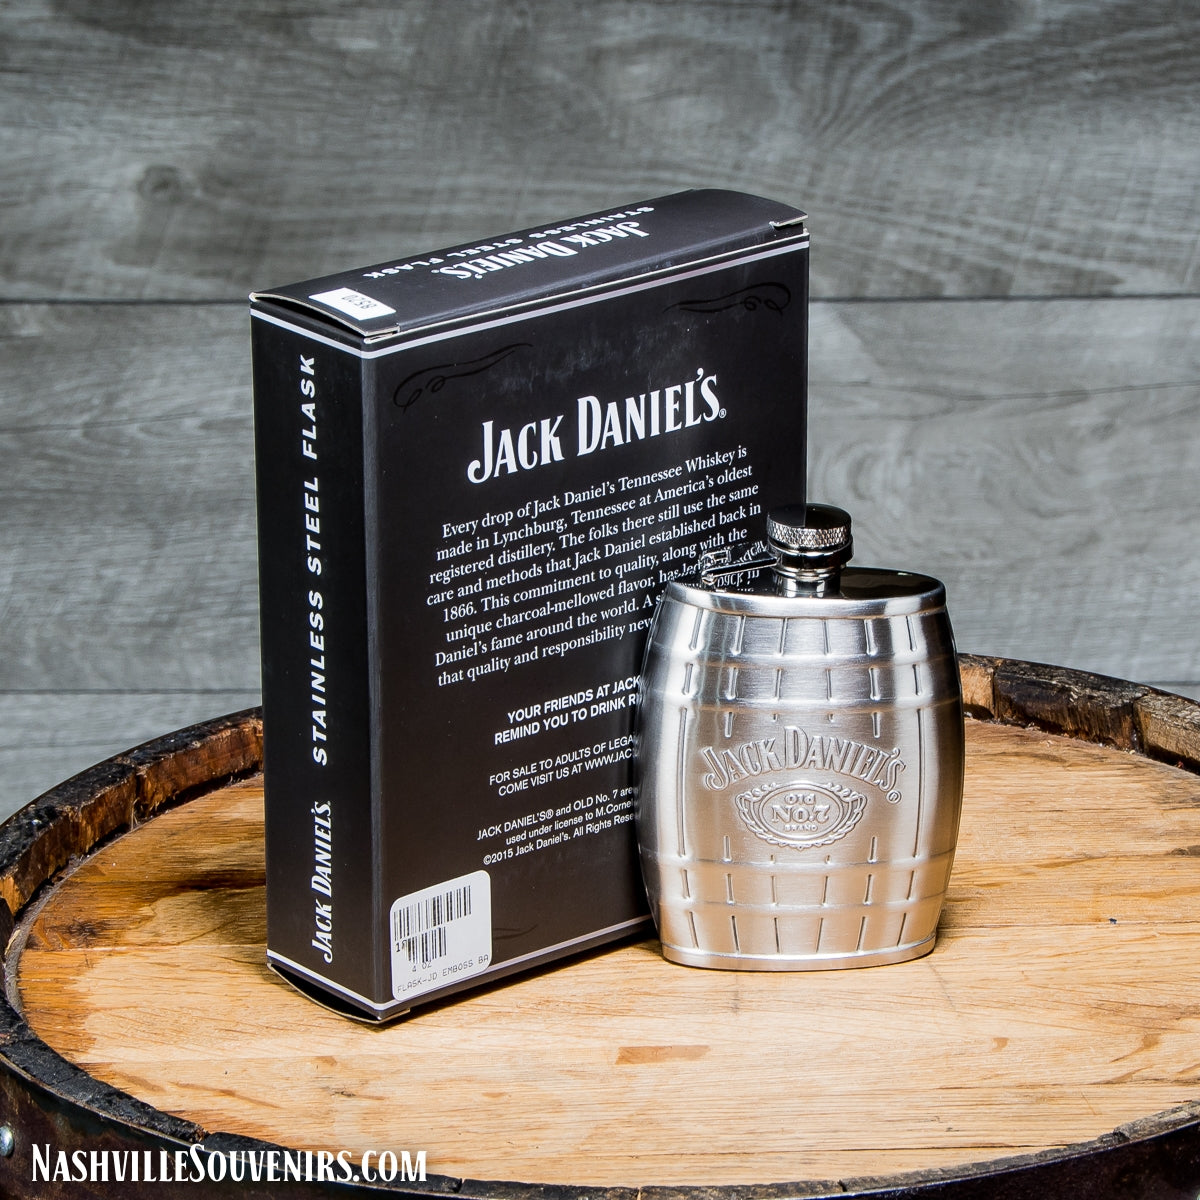 Officially licensed Jack Daniels Embossed Cartouche Logo Barrel Flask.  FREE SHIPPING on all US orders over $75!